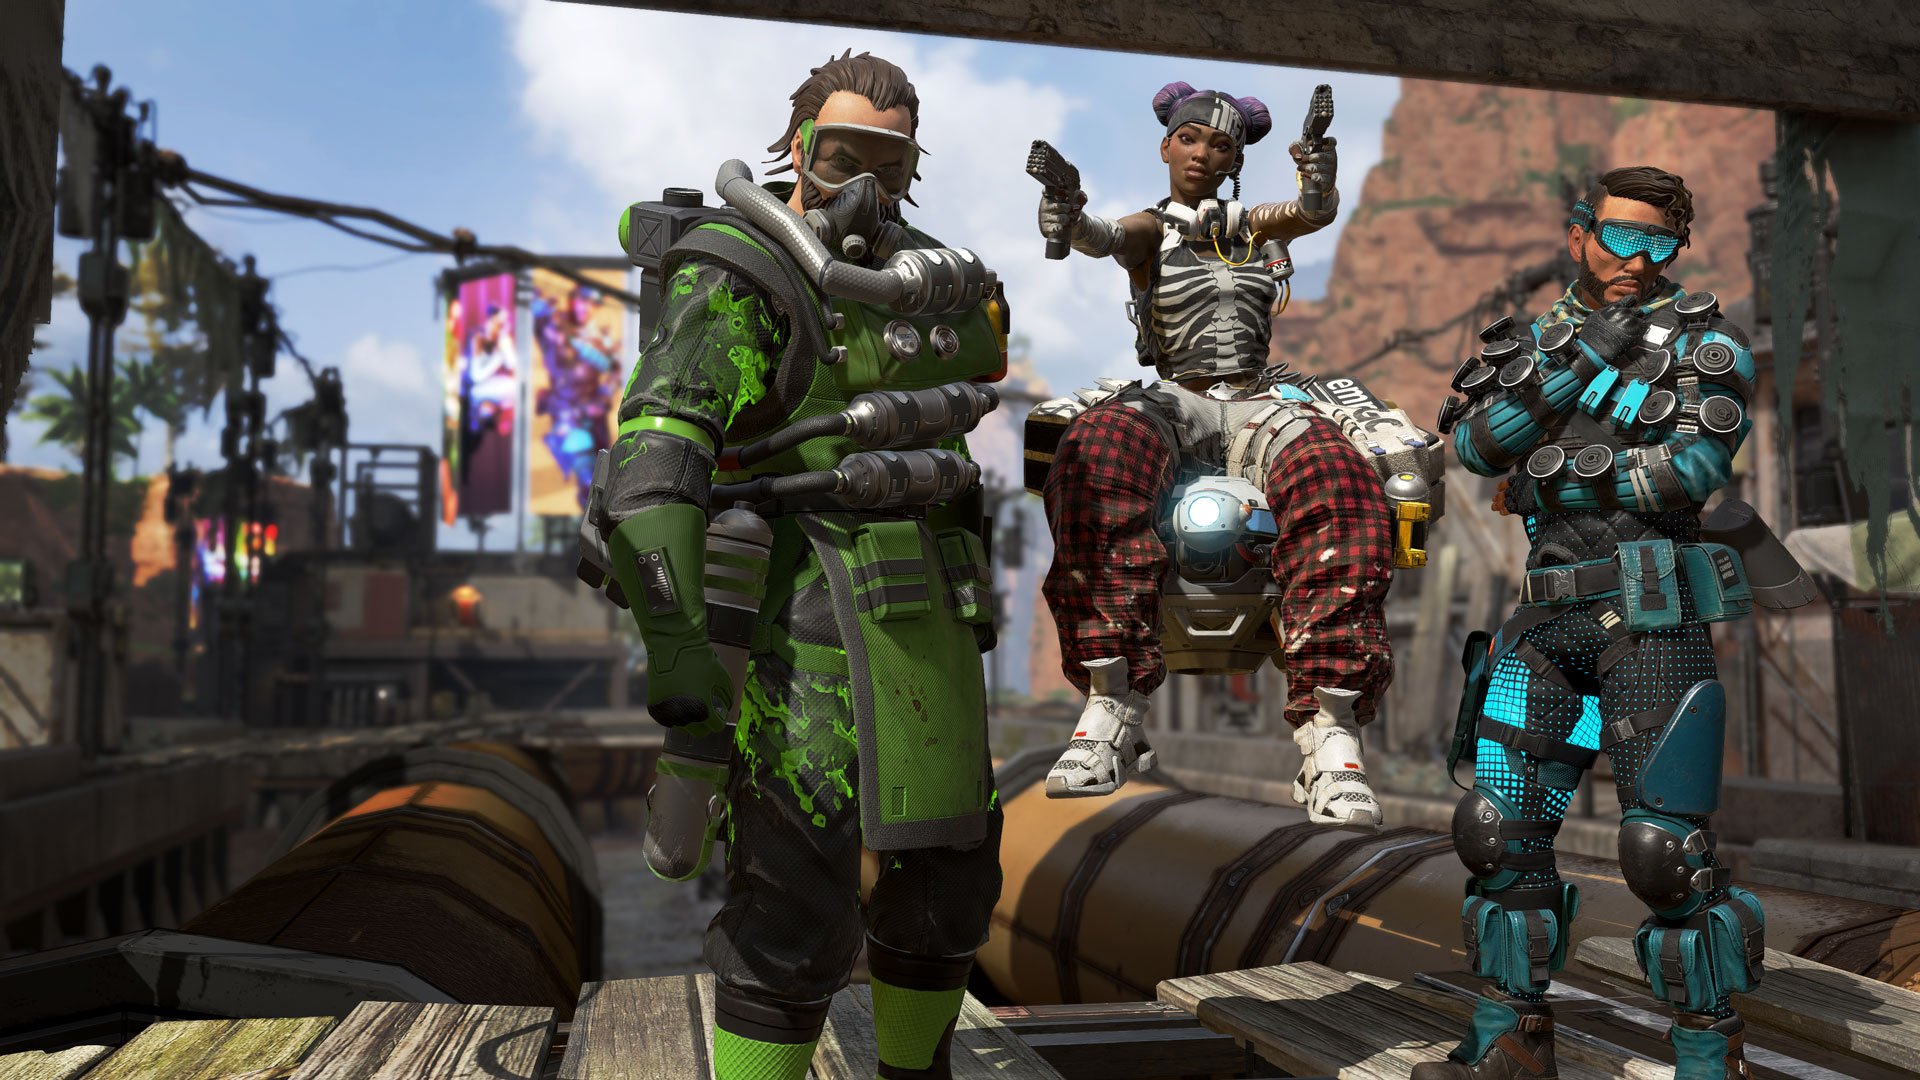 Apex Legends brings back Kings Canyon for a limited time starting tomorrow